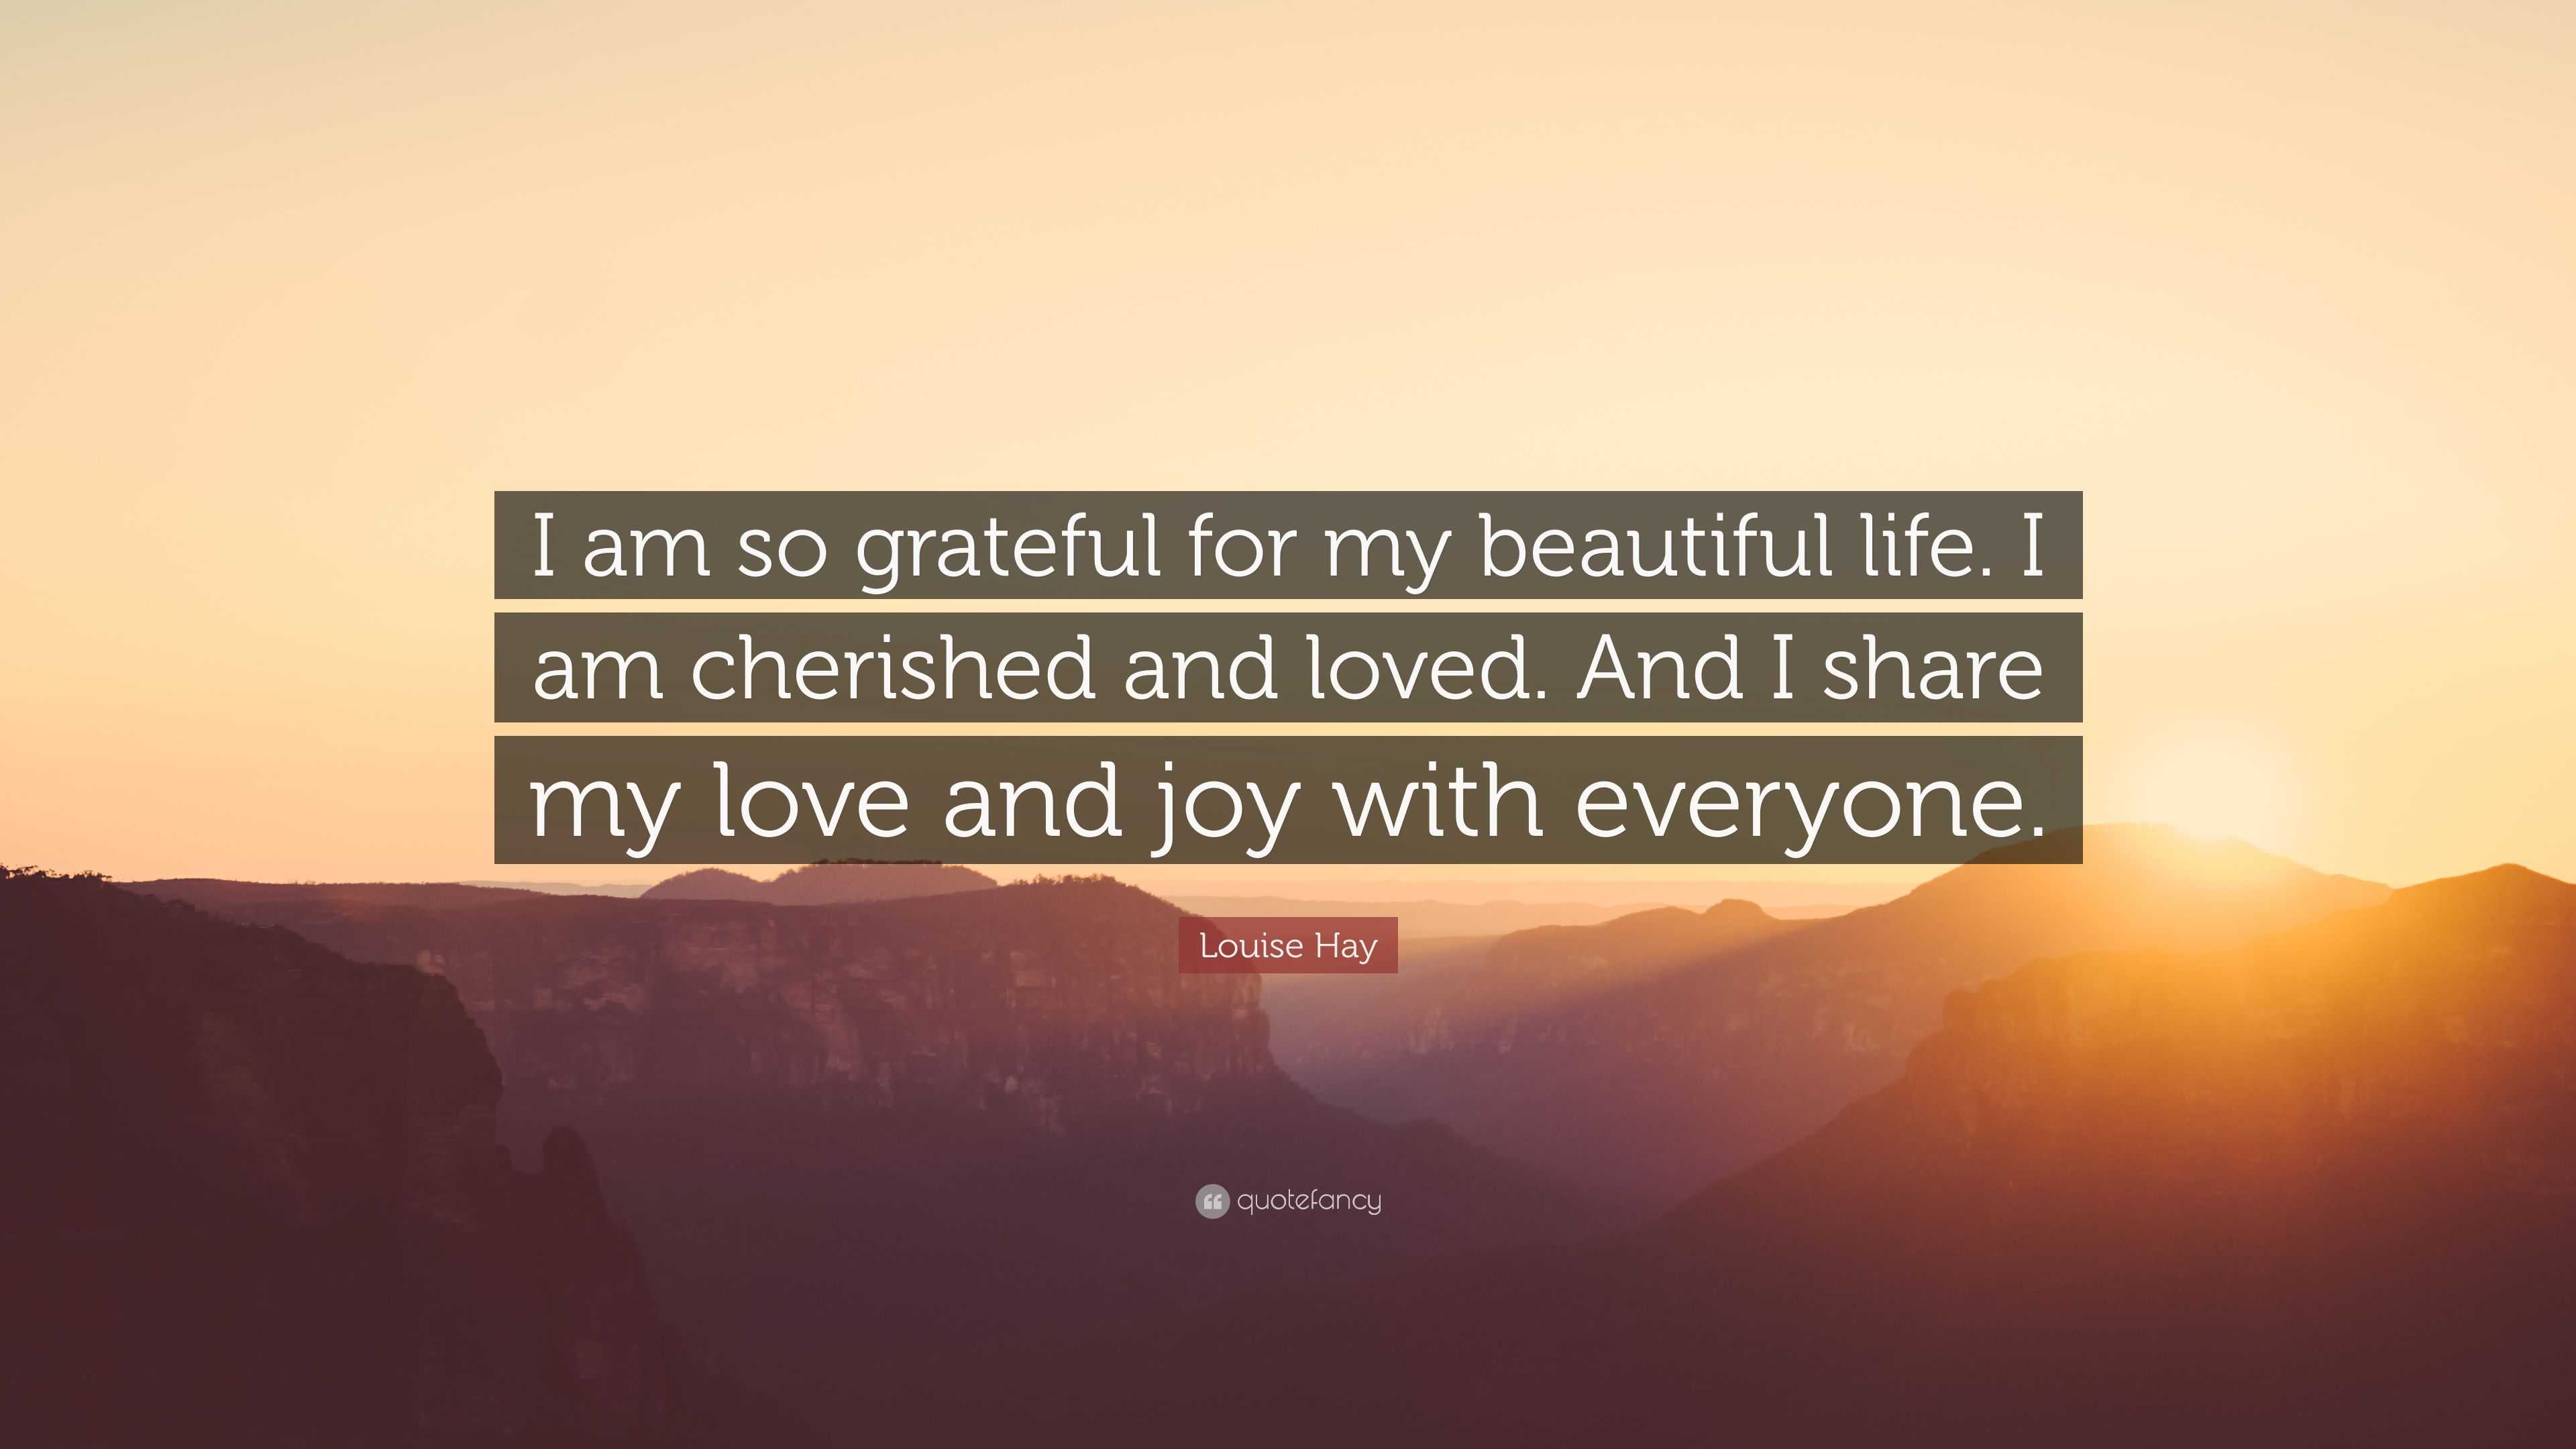 Louise Hay Quote “i Am So Grateful For My Beautiful Life I Am Cherished And Loved And I Share